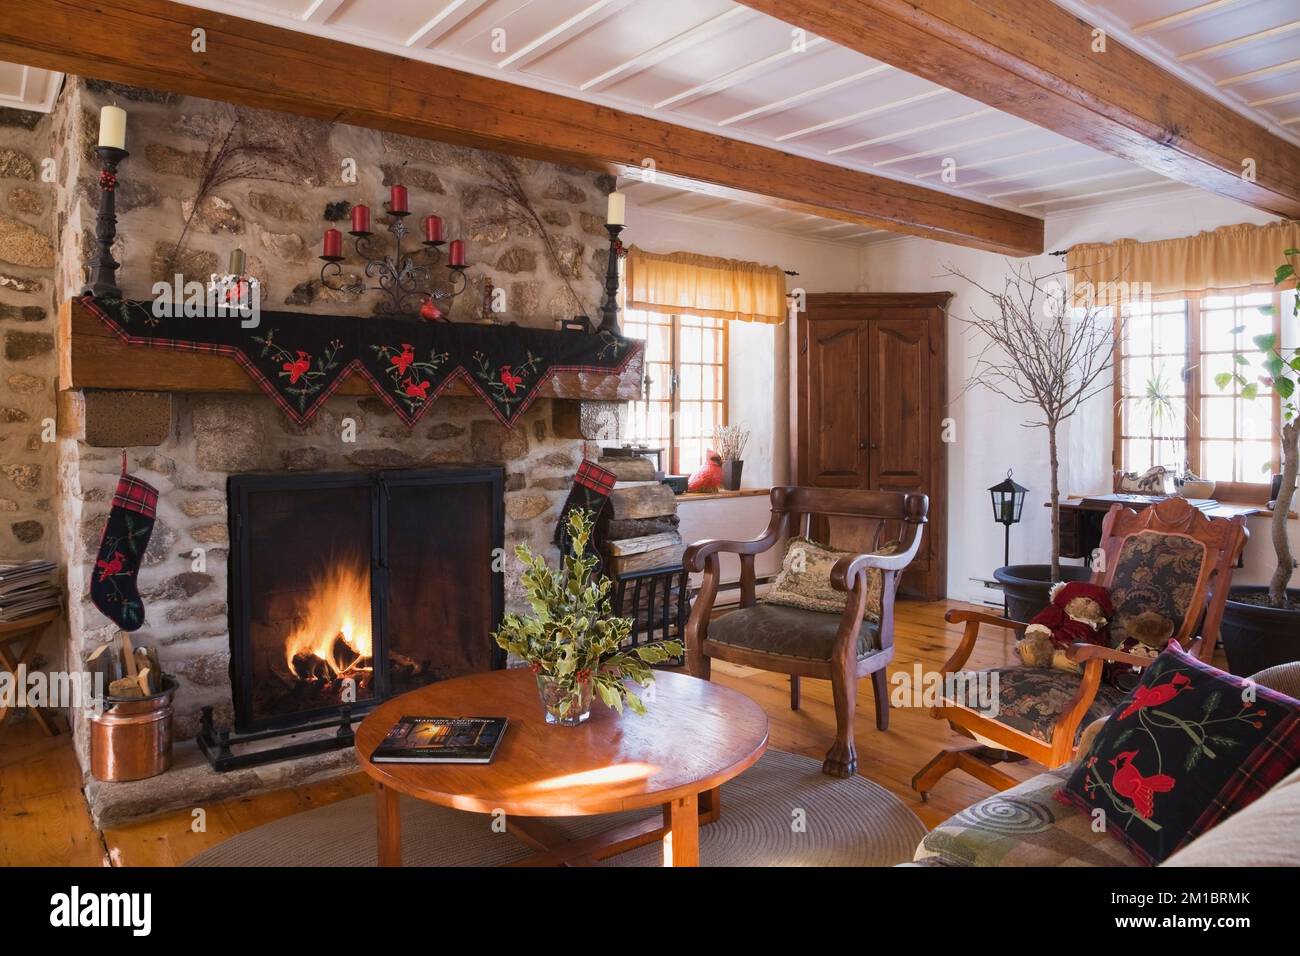 Lit fieldstone fireplace with antique wooden armchairs and Christmas decorations in living room inside old 1800s Canadiana cottage style log home. Stock Photo